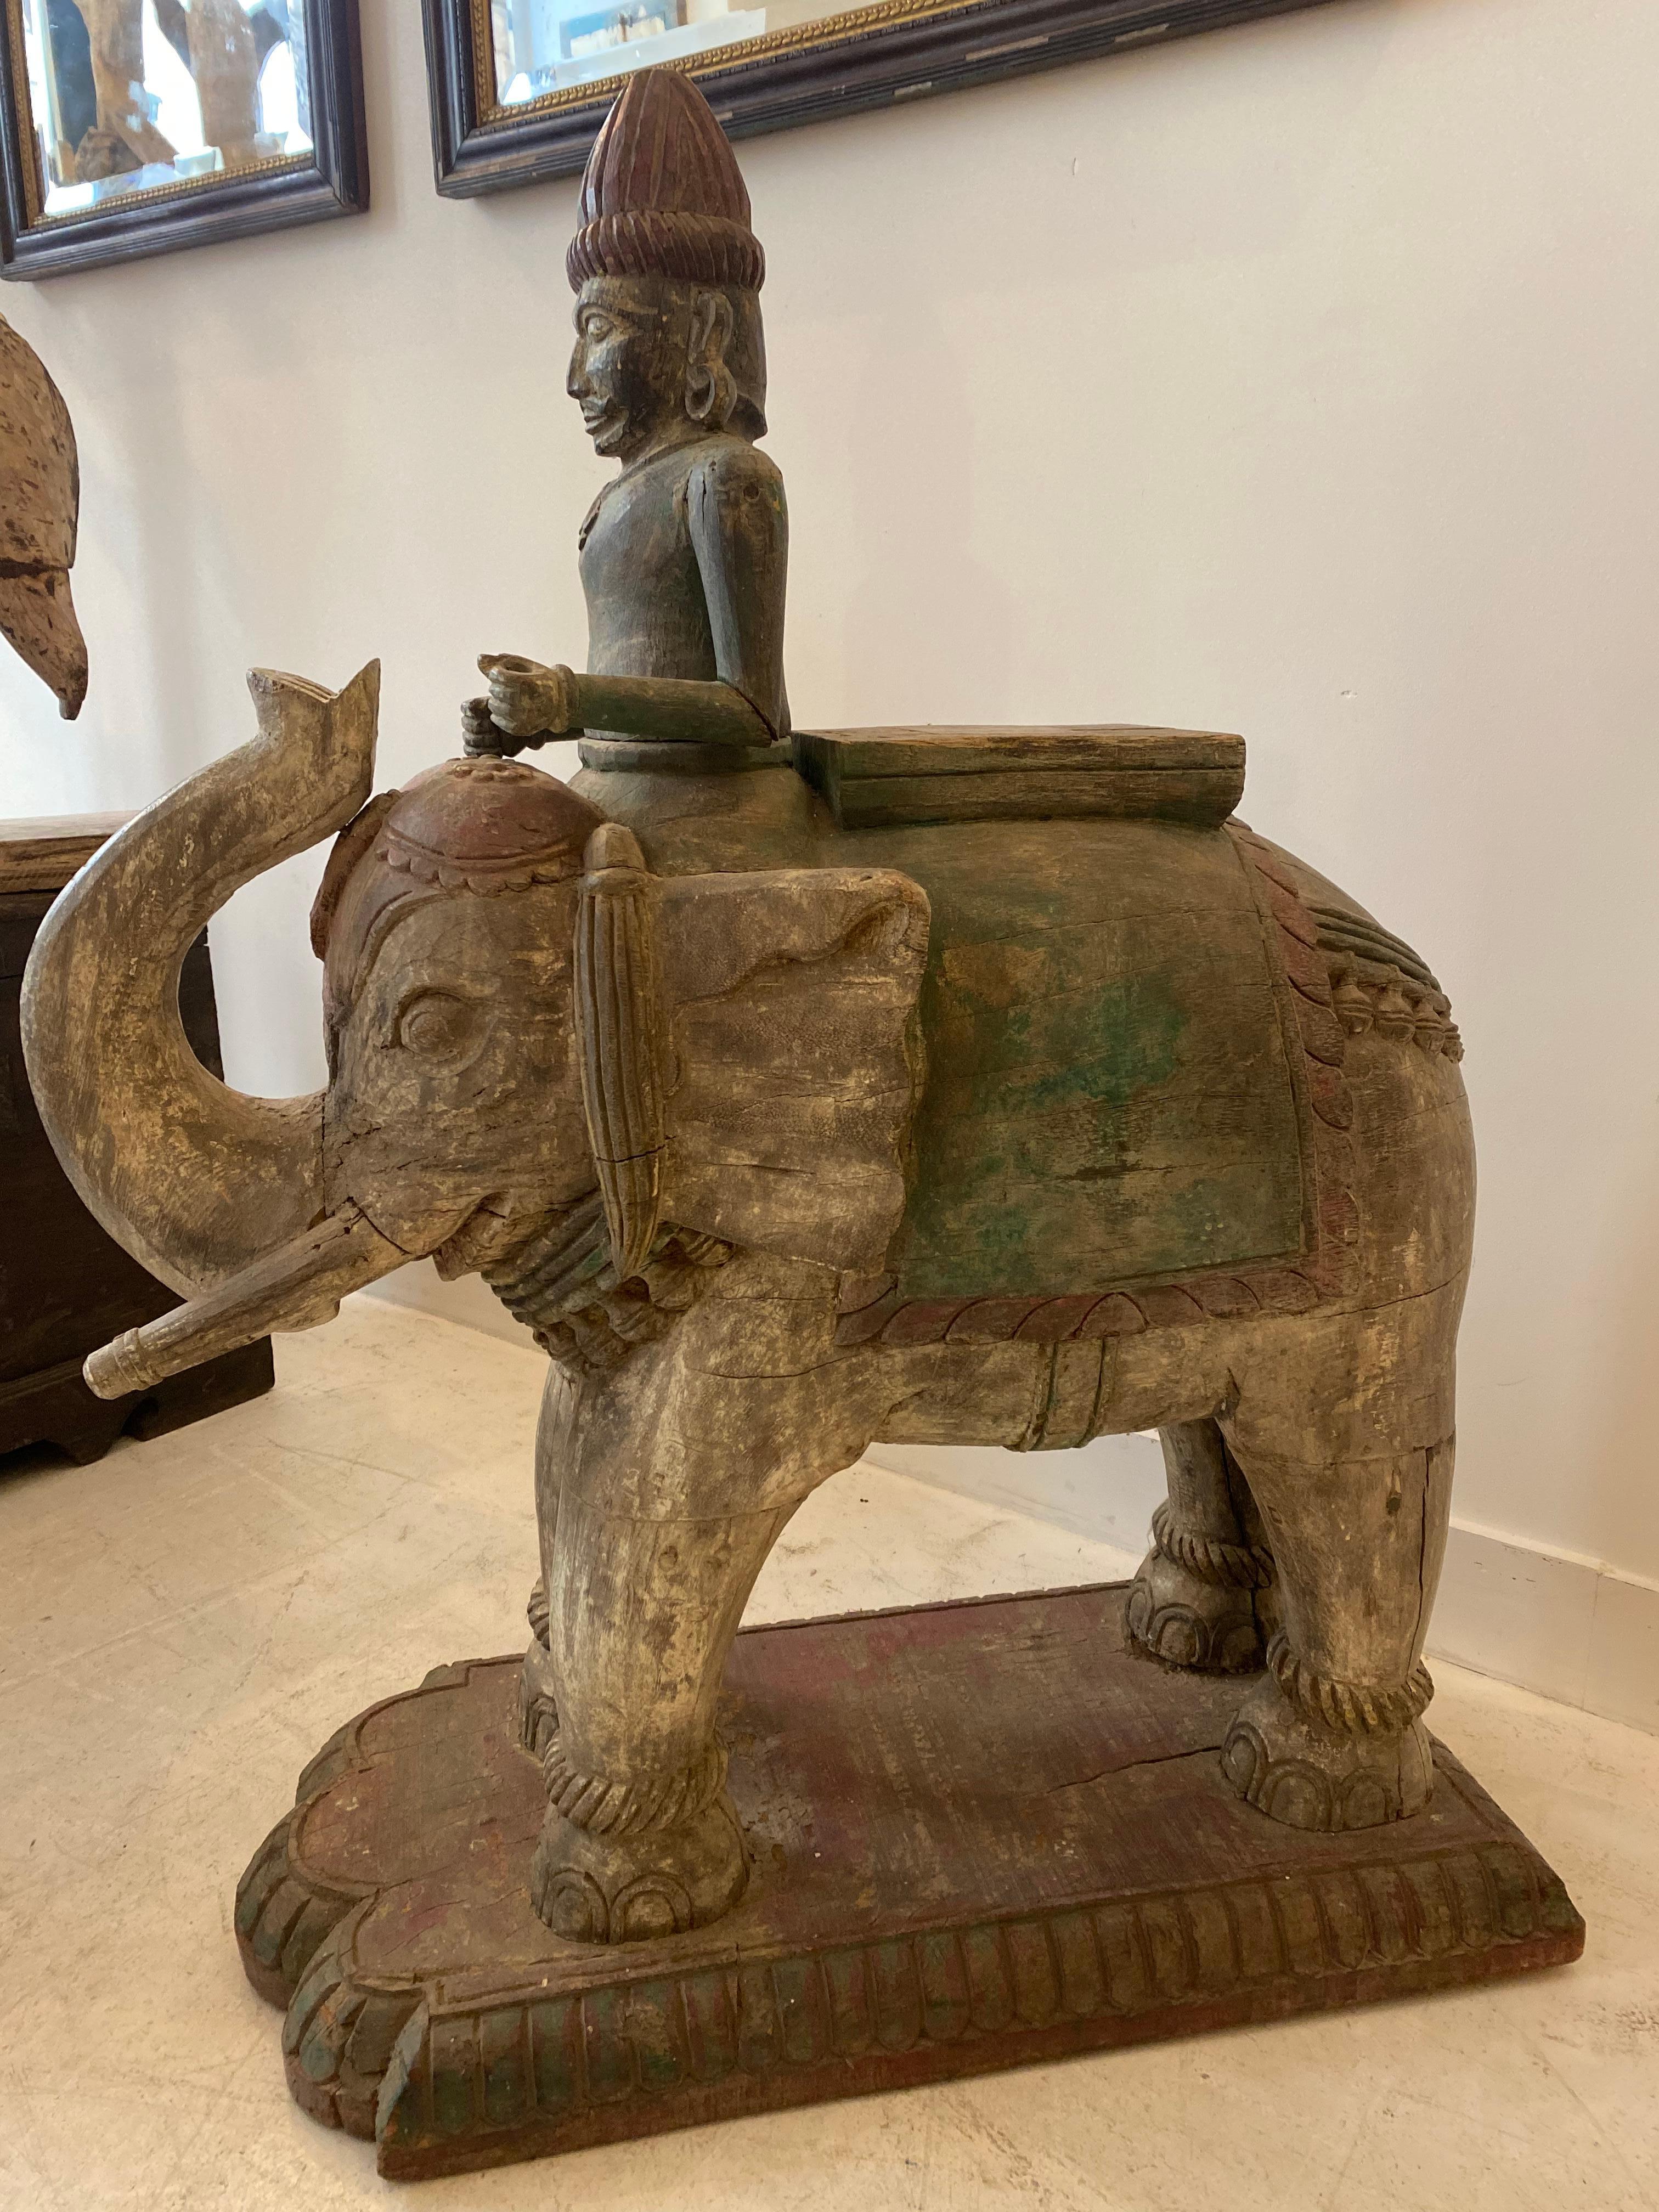 Indian sculpture in polychrome wood representing an elephant and its carnac. object intended for religious processions in India
Very good condition 